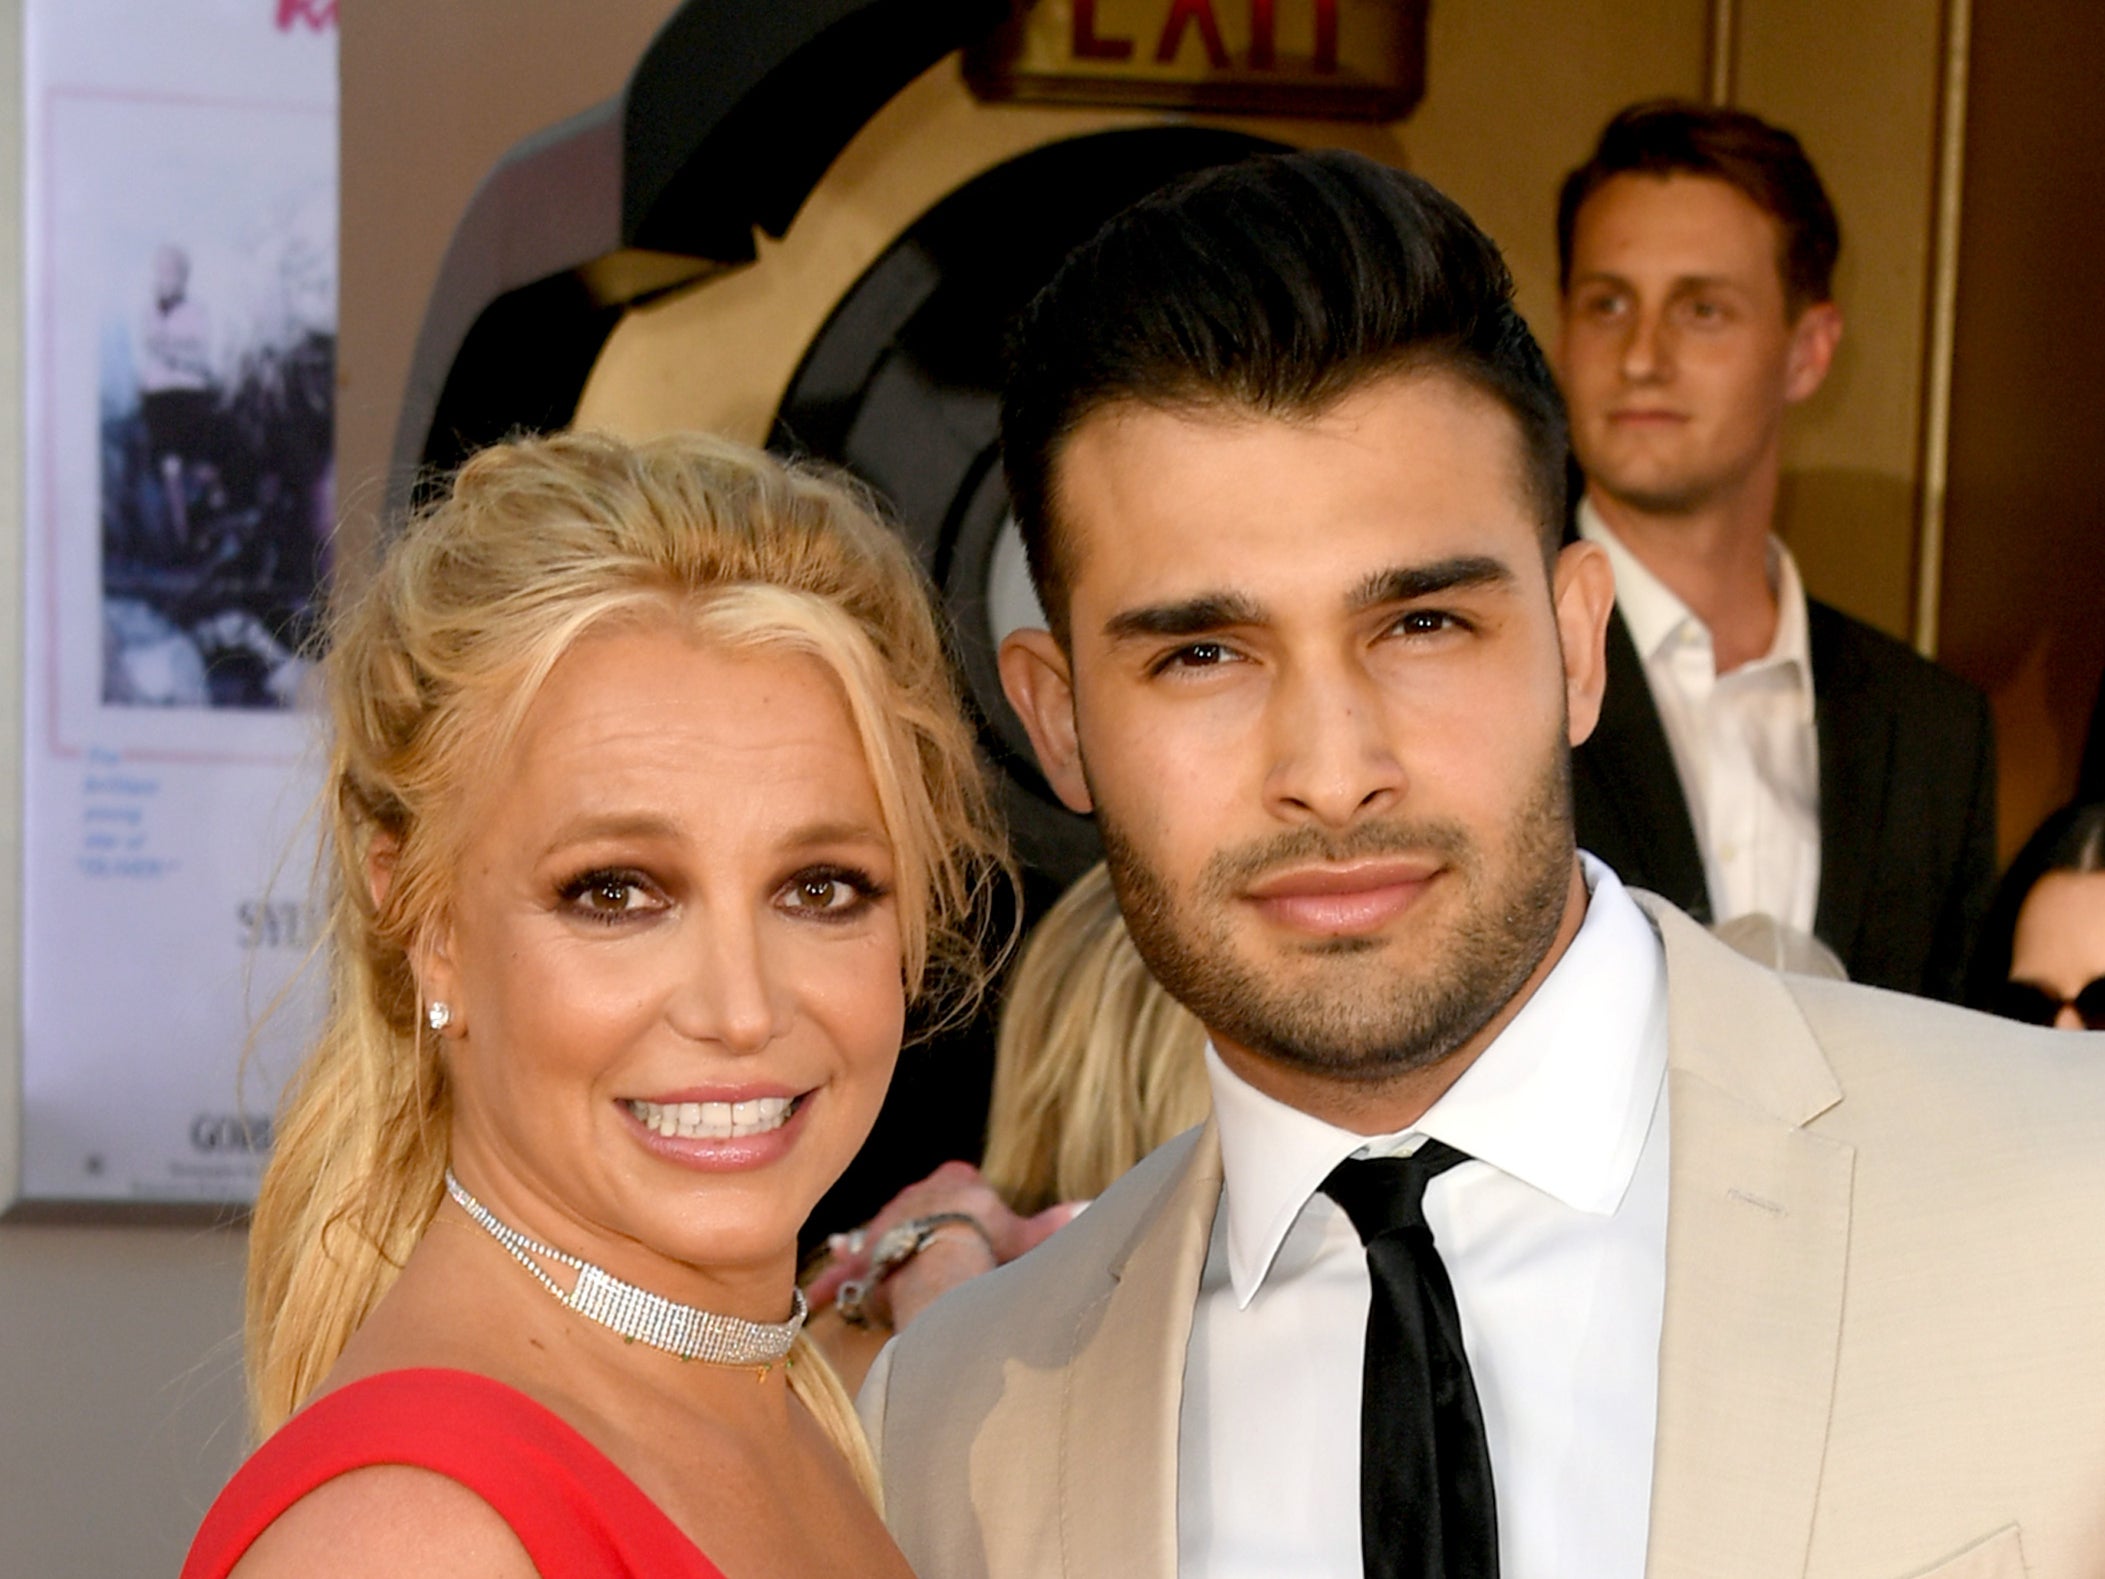 Britney Spears has been dating Sam Asghari since 2016